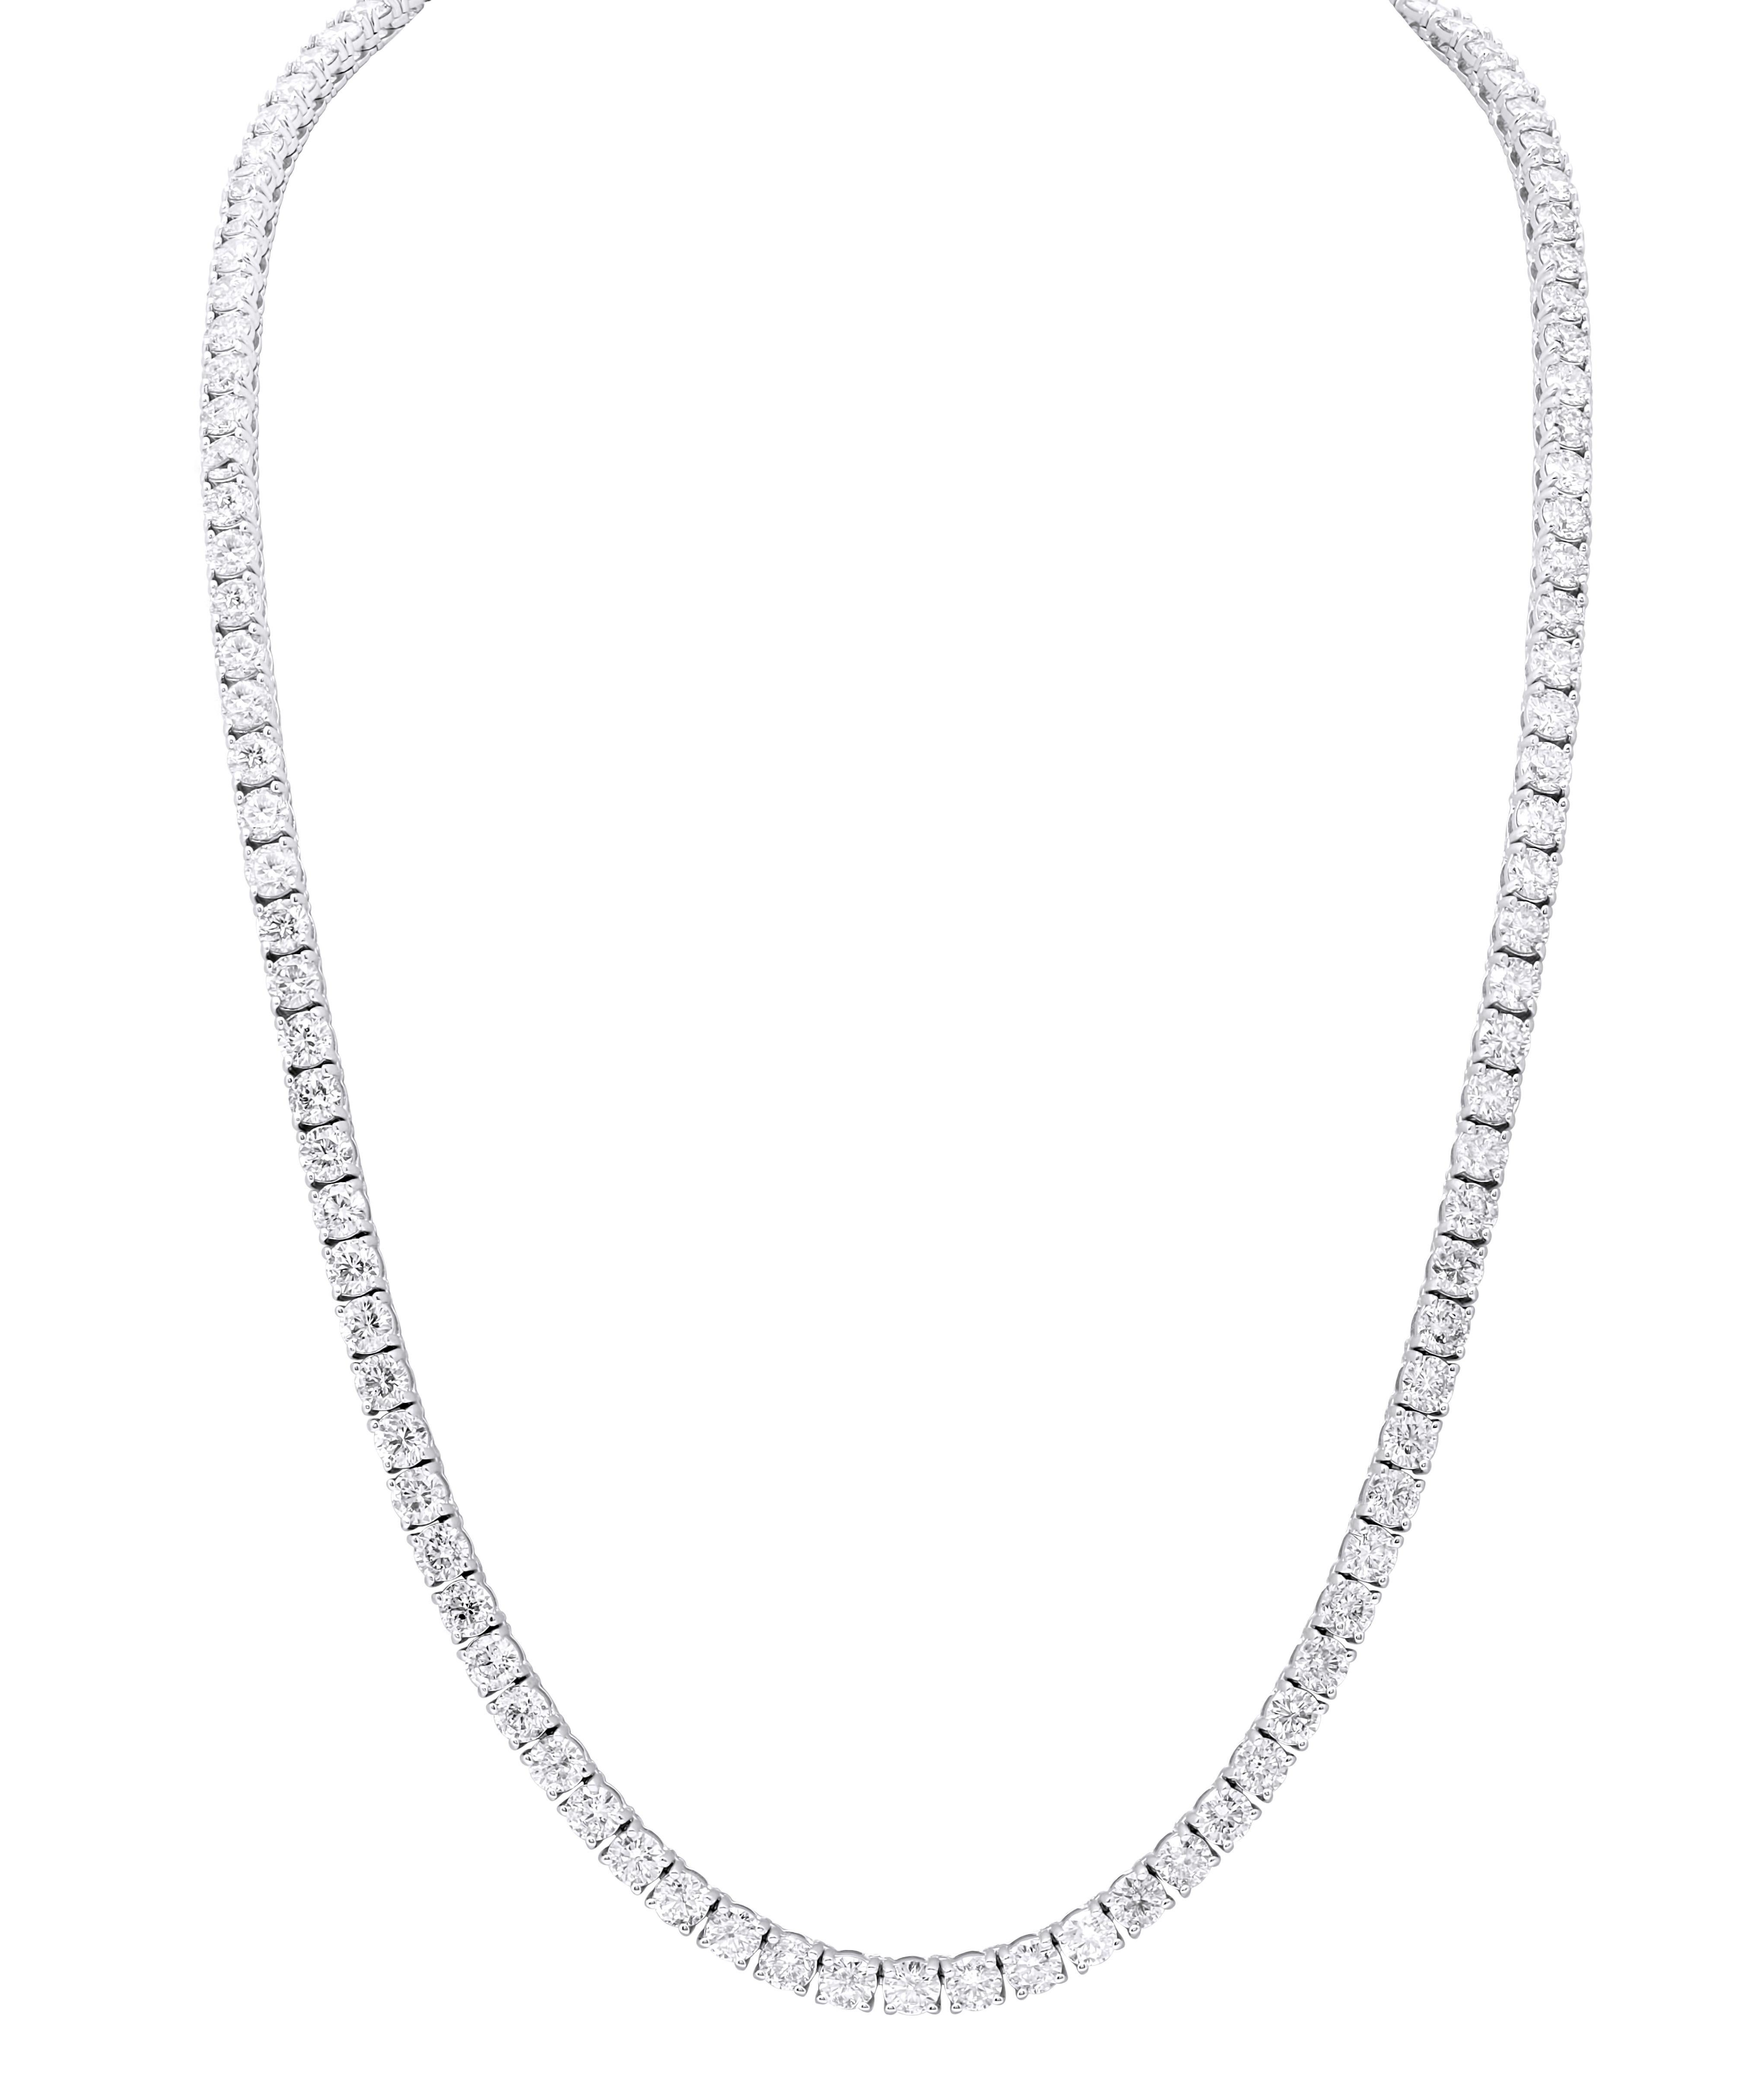 Round Cut Diana M. 11.45 Cts Round Diamond 4 Prong Tennis Necklace 14k White Gold  For Sale